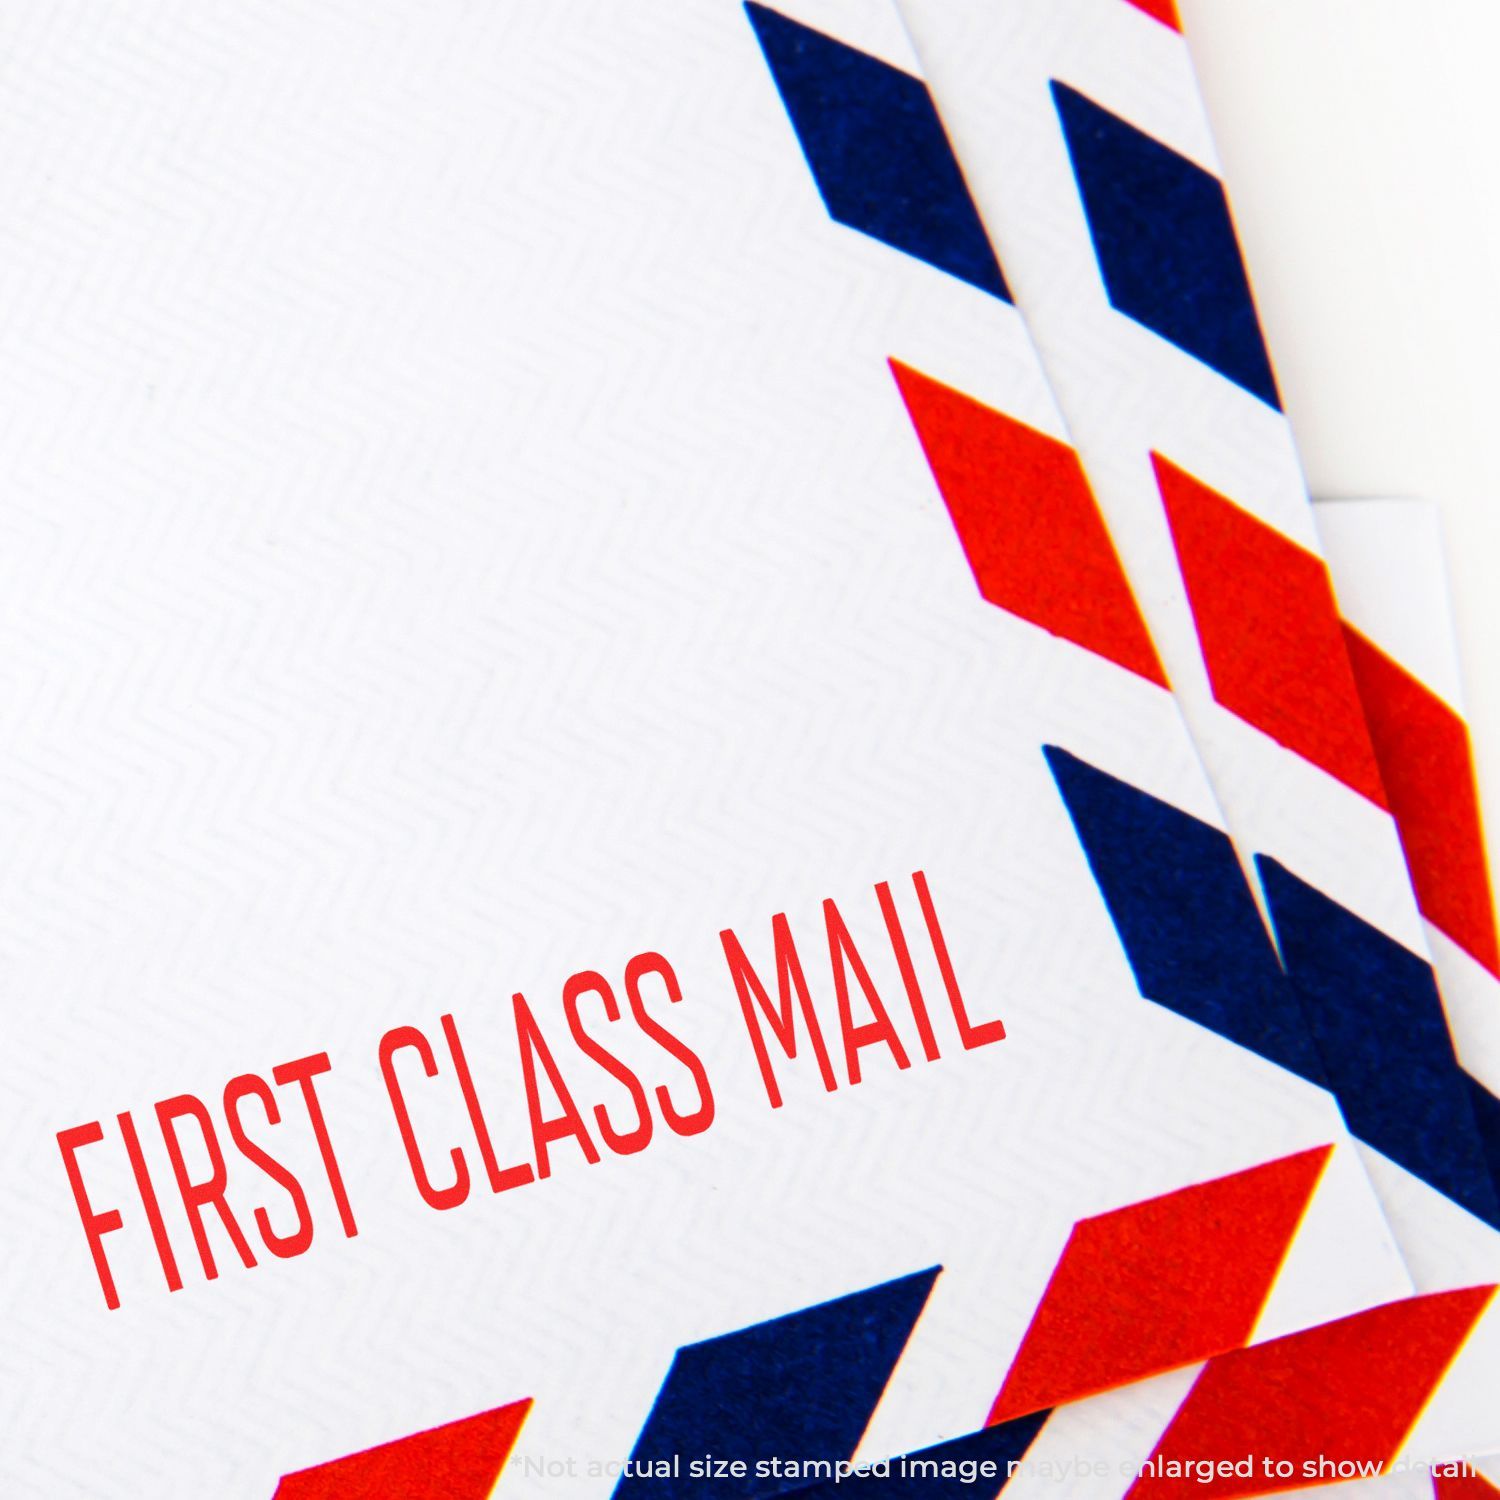 A self-inking stamp with a stamped image showing how the text "FIRST CLASS MAIL" in a narrow font is displayed after stamping.